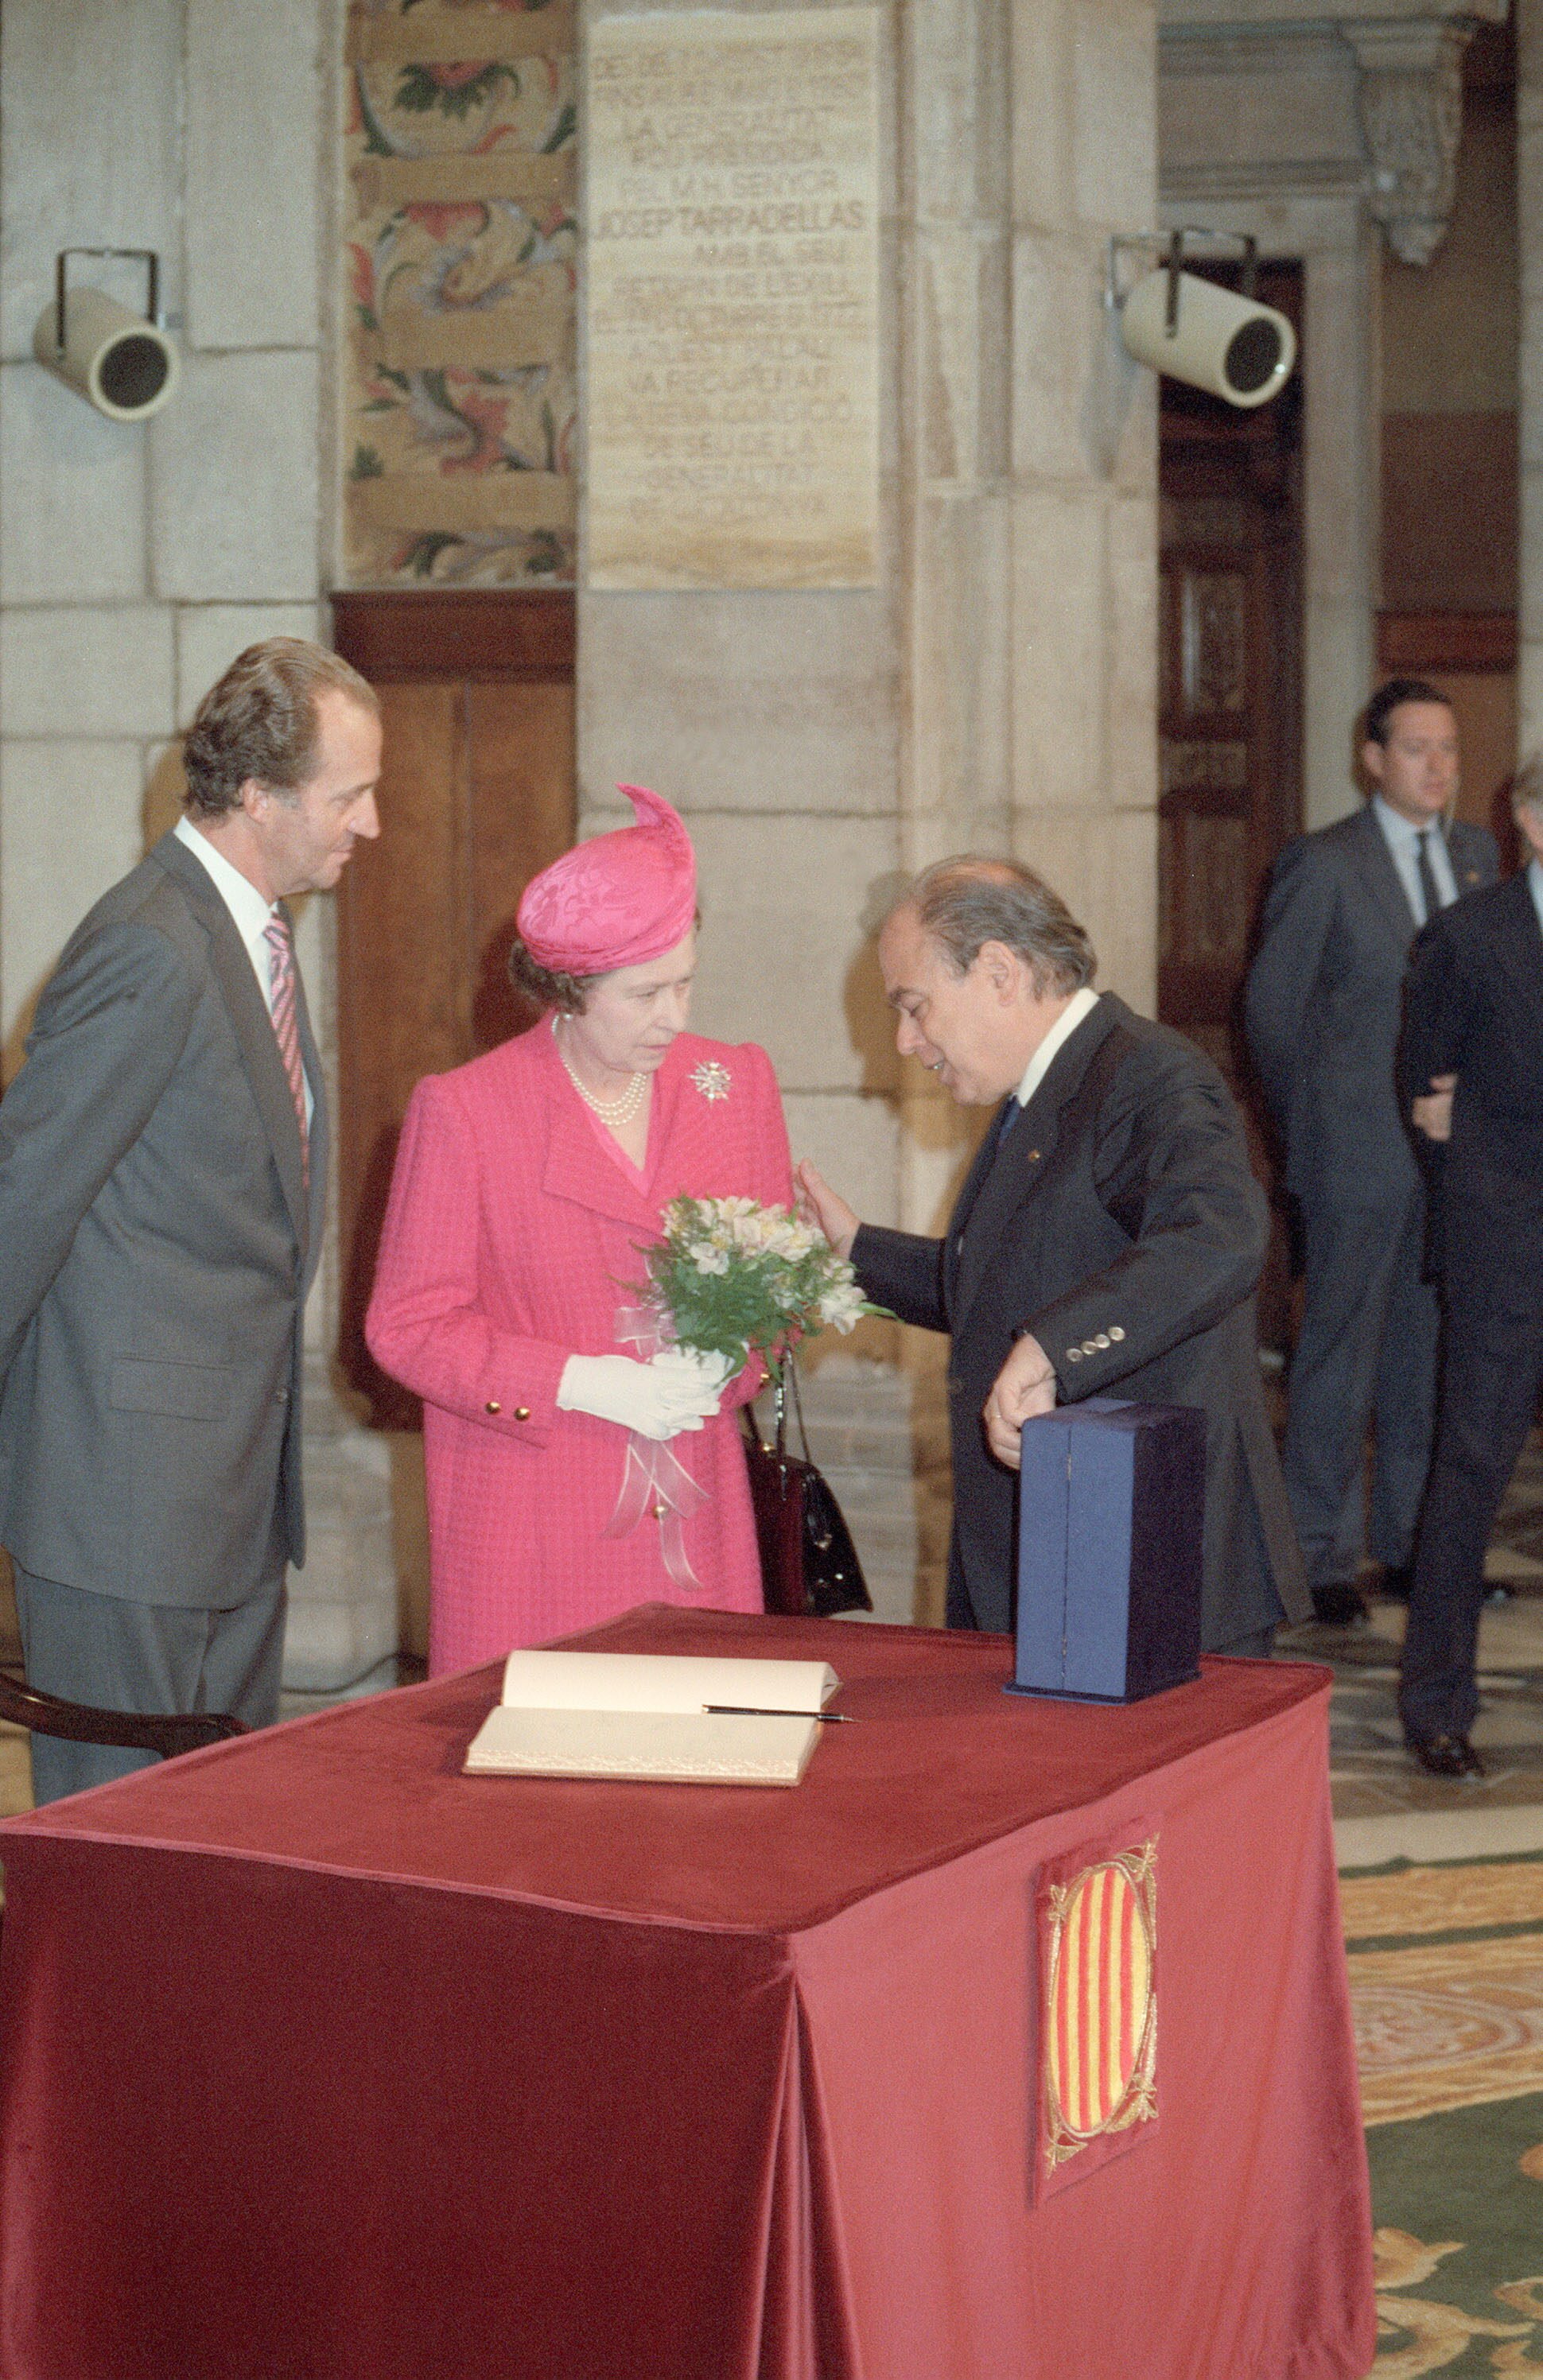 The day that Elizabeth II learned what England and Catalonia have in common